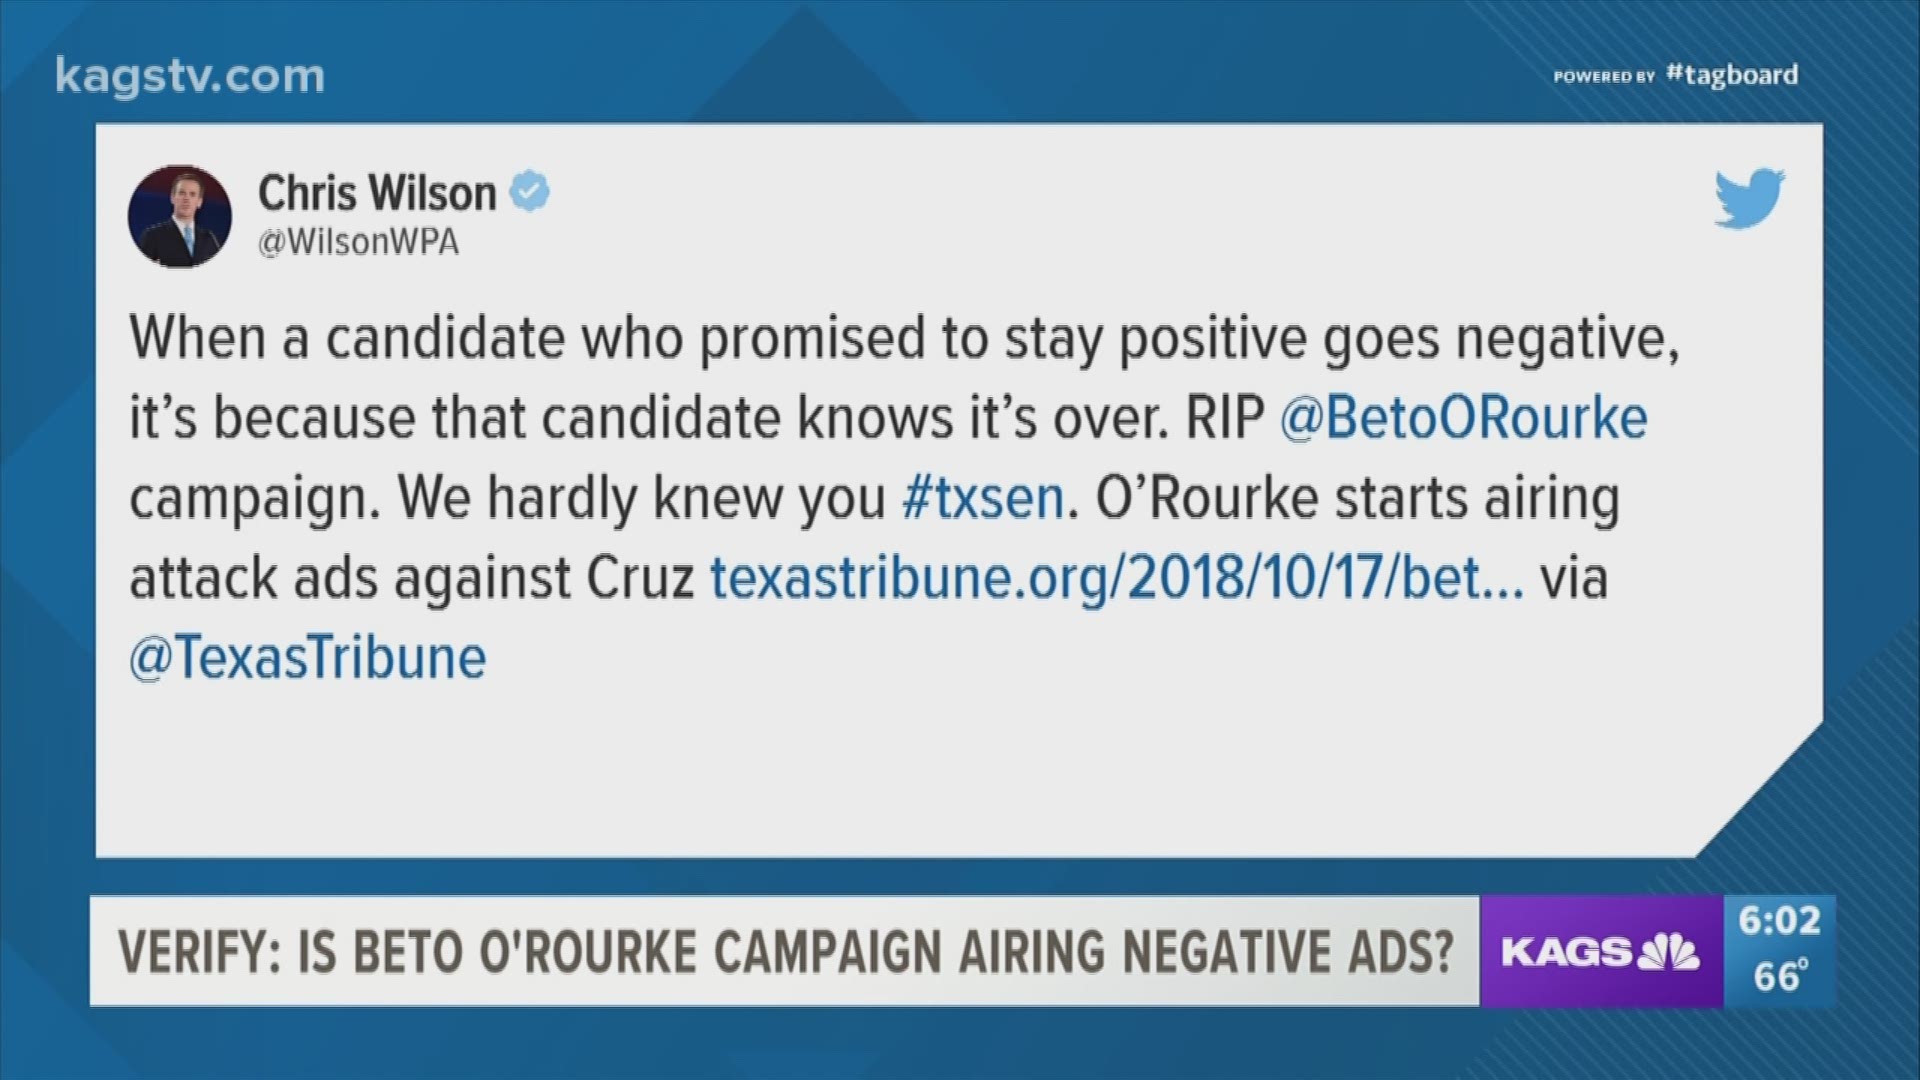 As election day nears, we wanted to verify for you if Beto O'Rourke is  airing negative ads against his opponent Senator ted Cruz.